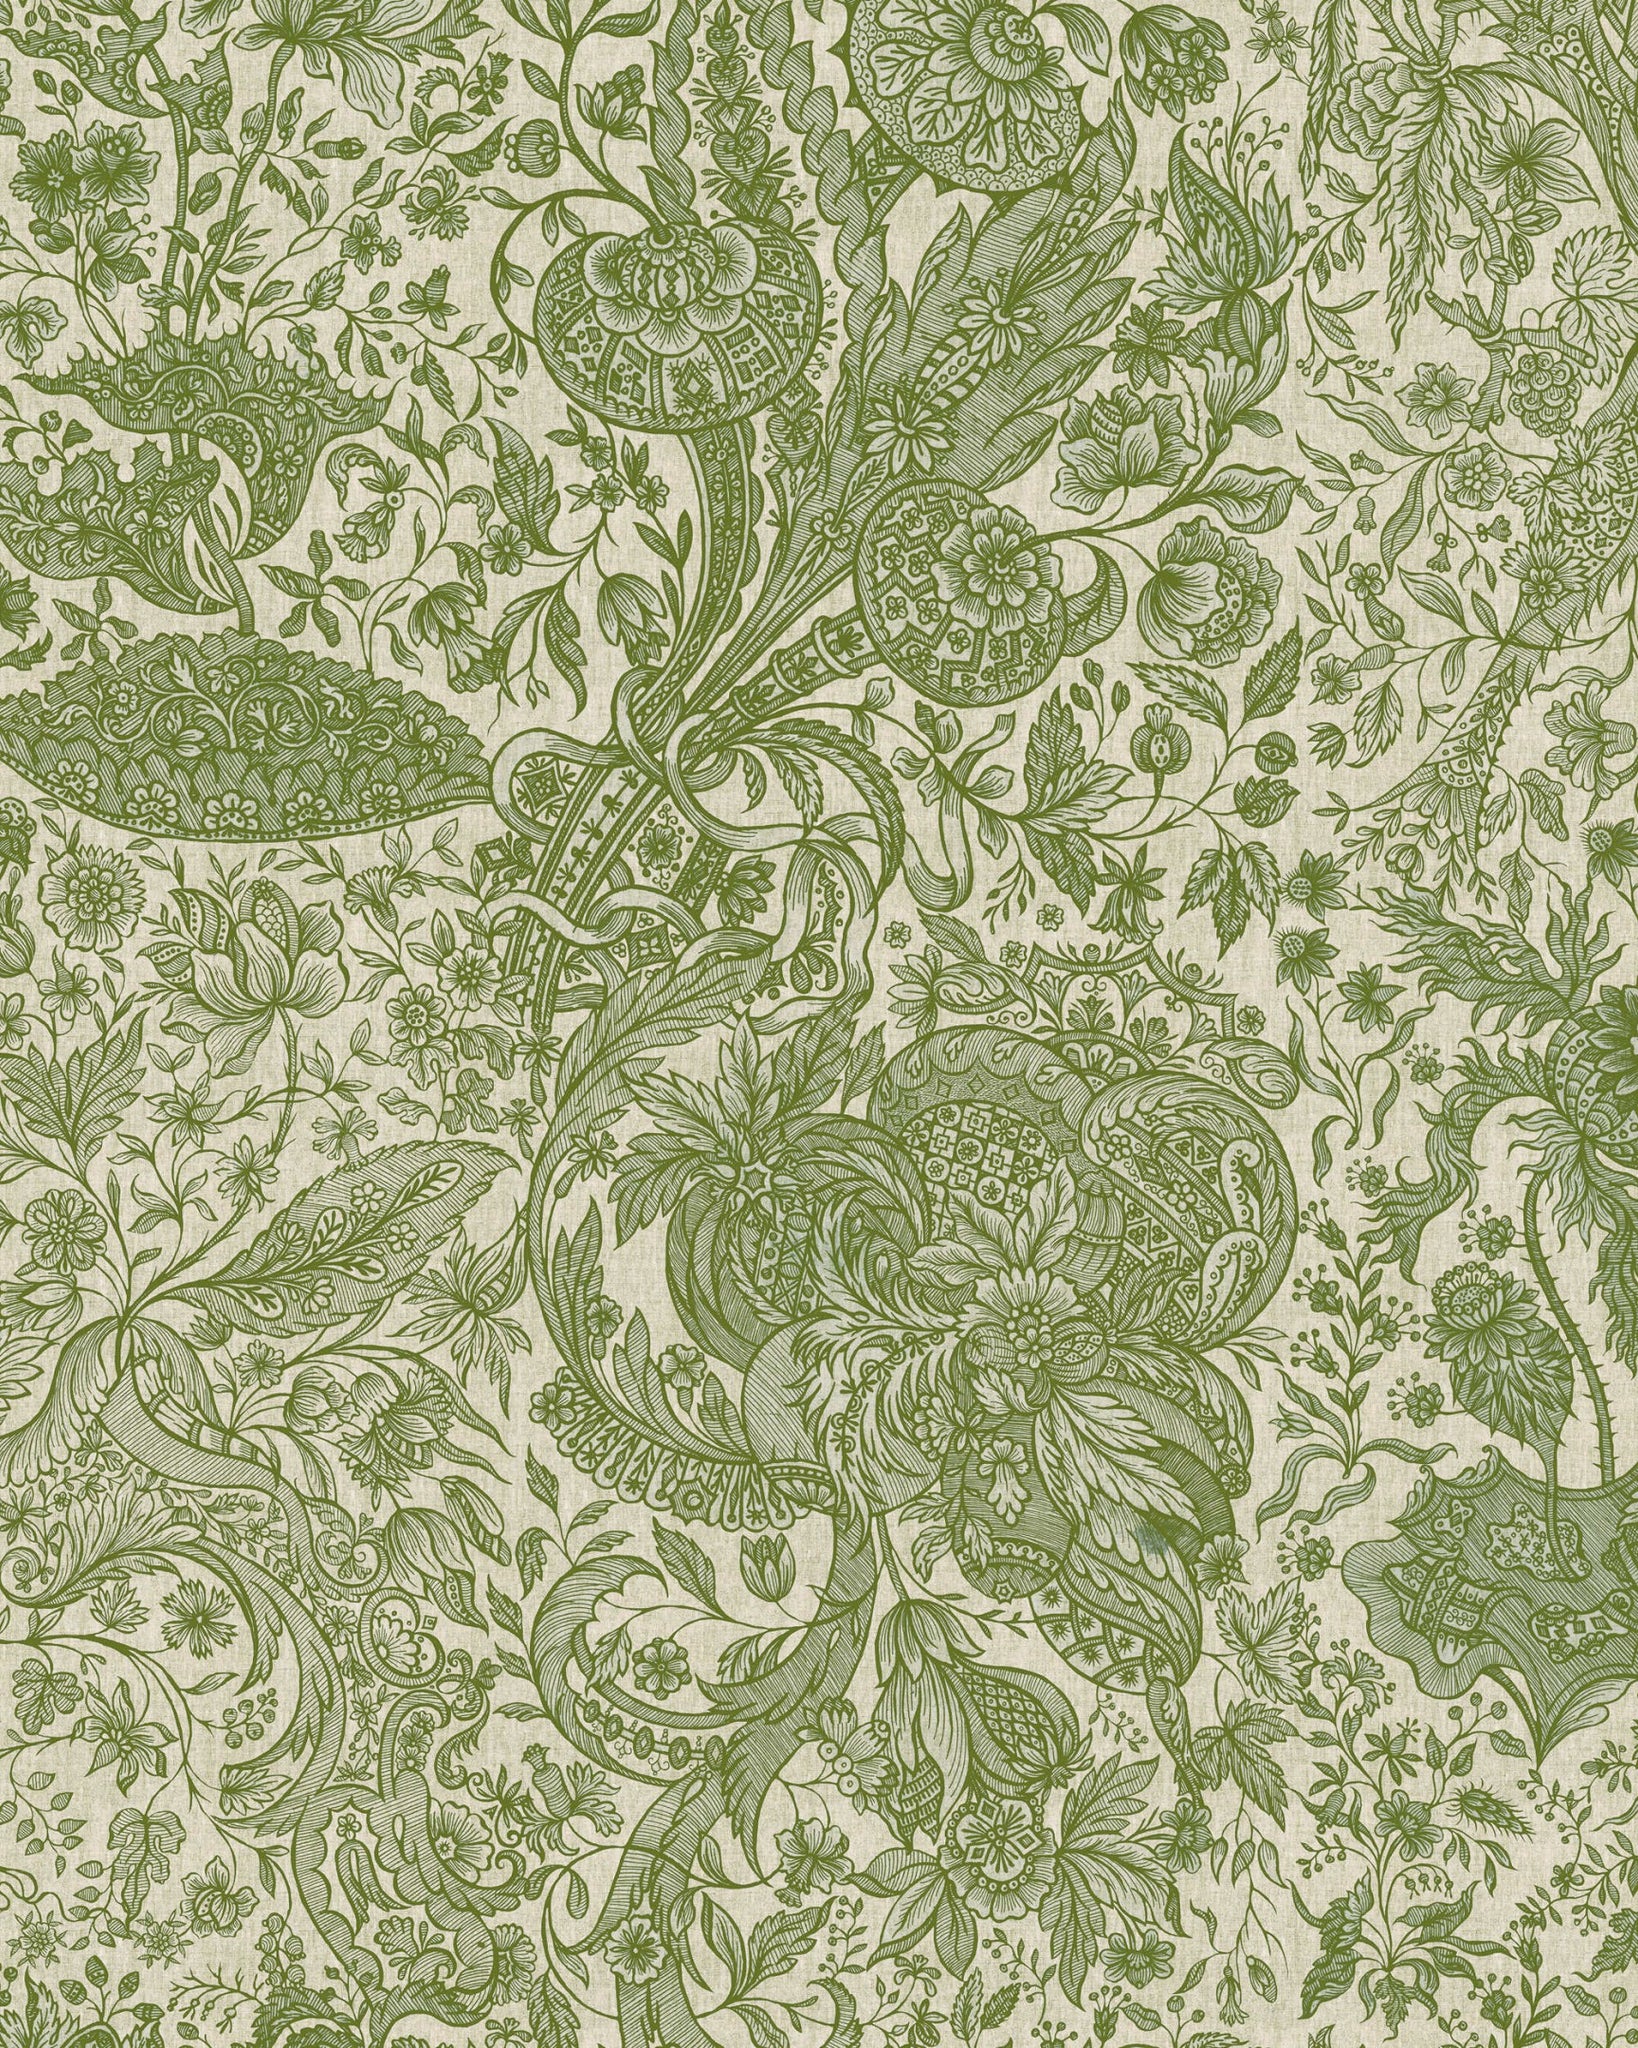 Sarkozi Embroidery Wallpaper in Herbal from the Complementary Collecti ...